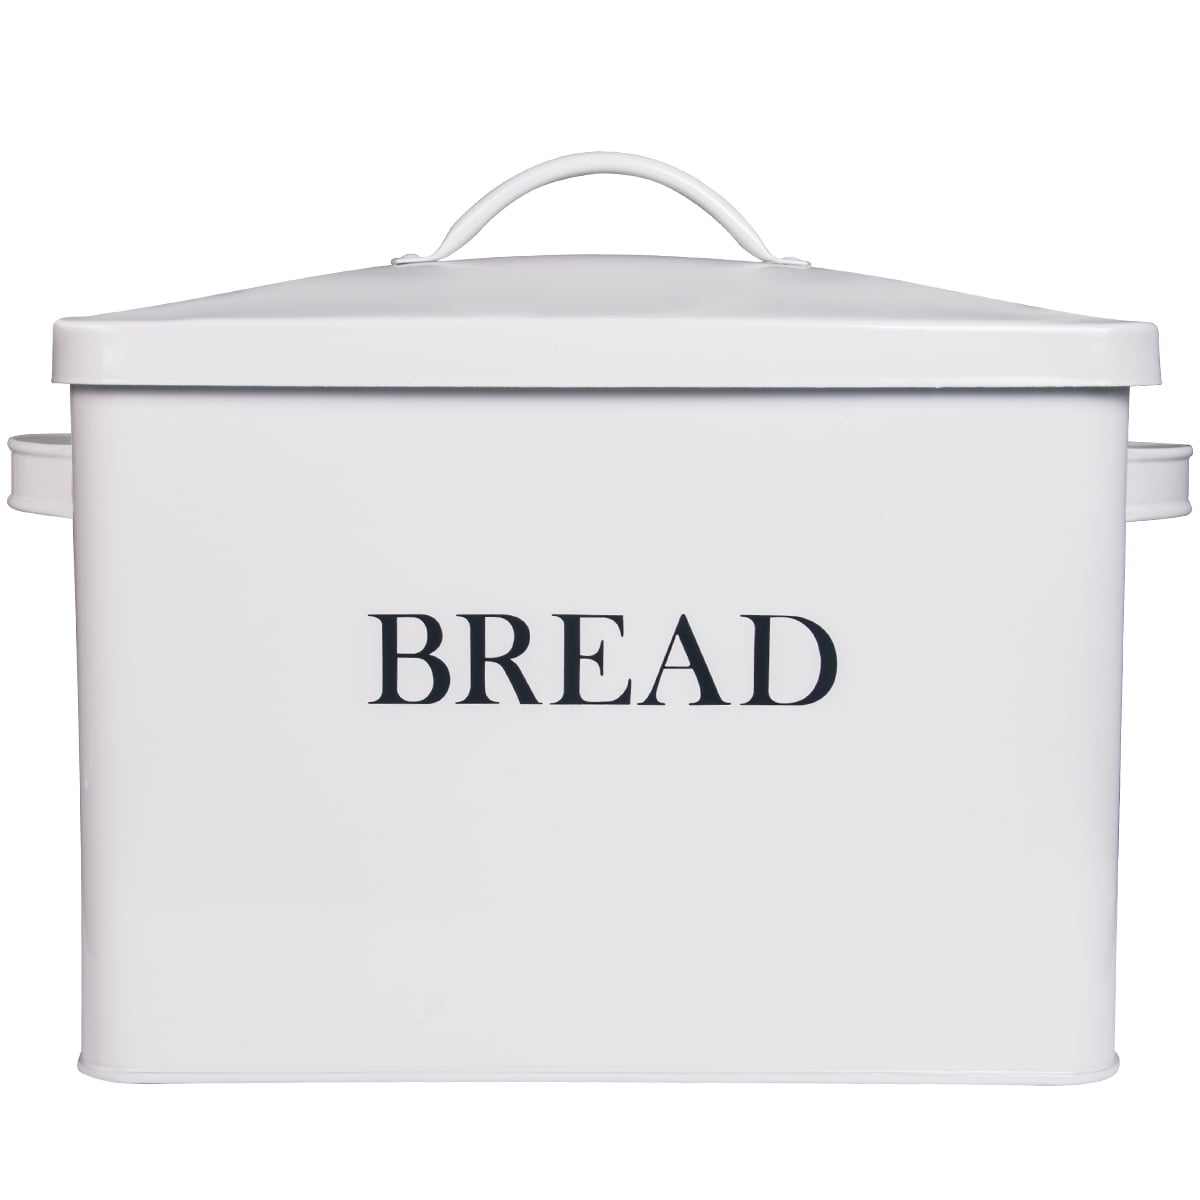 White Tower Roll Top Bread Bin with Stainless Steel Body and Mirror Finish 